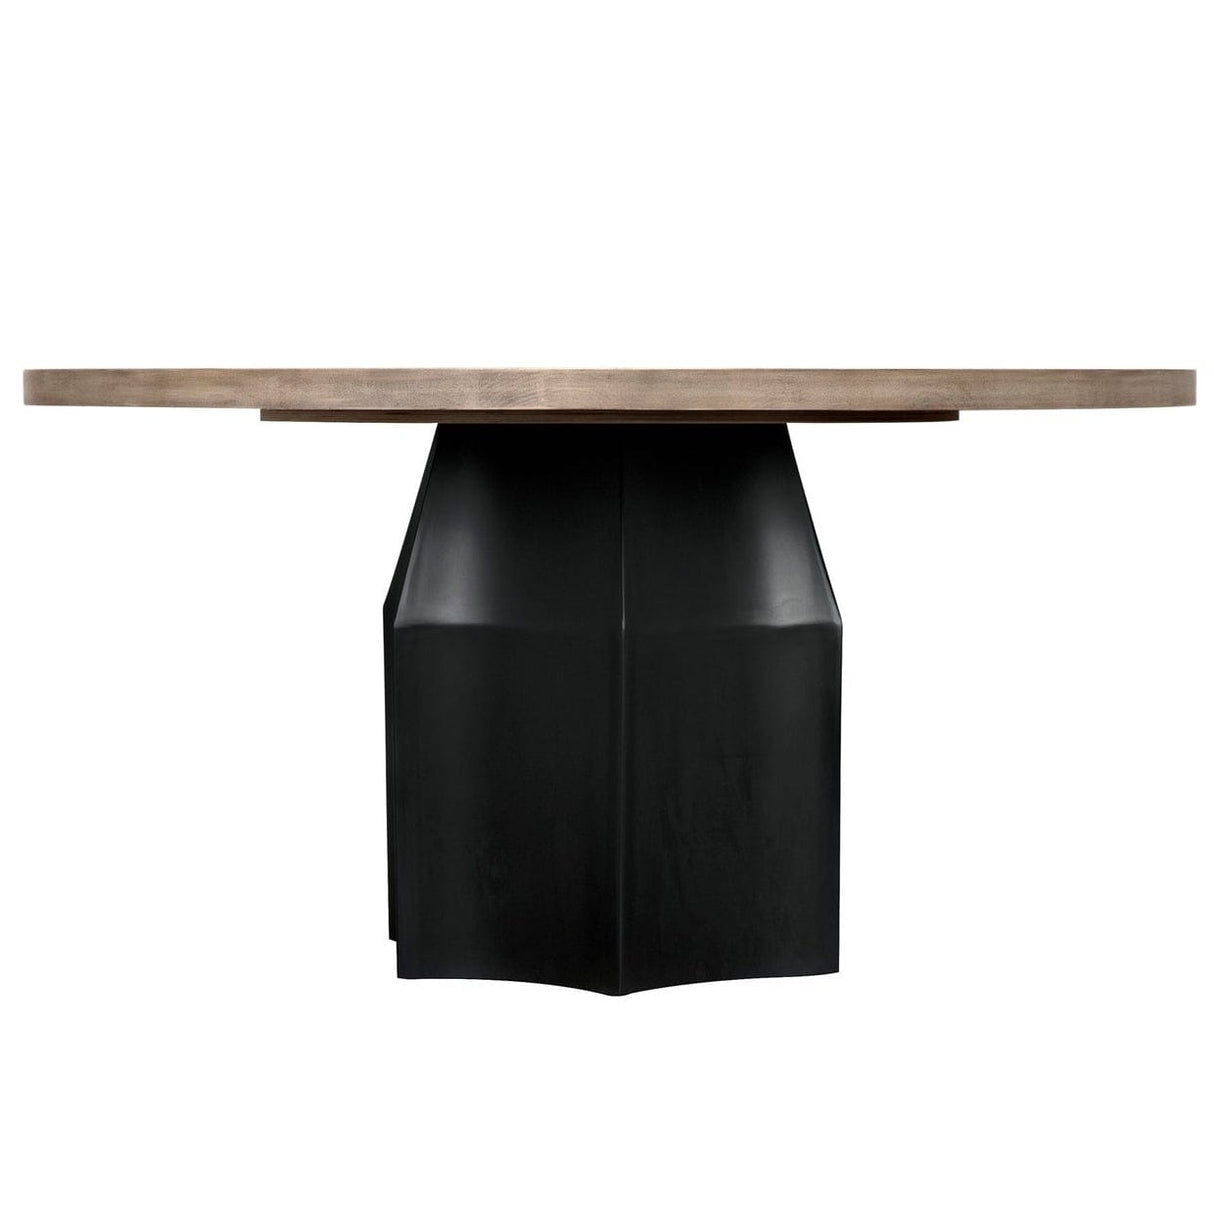 CFC Kamila Dining Table - HOLD FOR PRICING Tables cfc-CM286